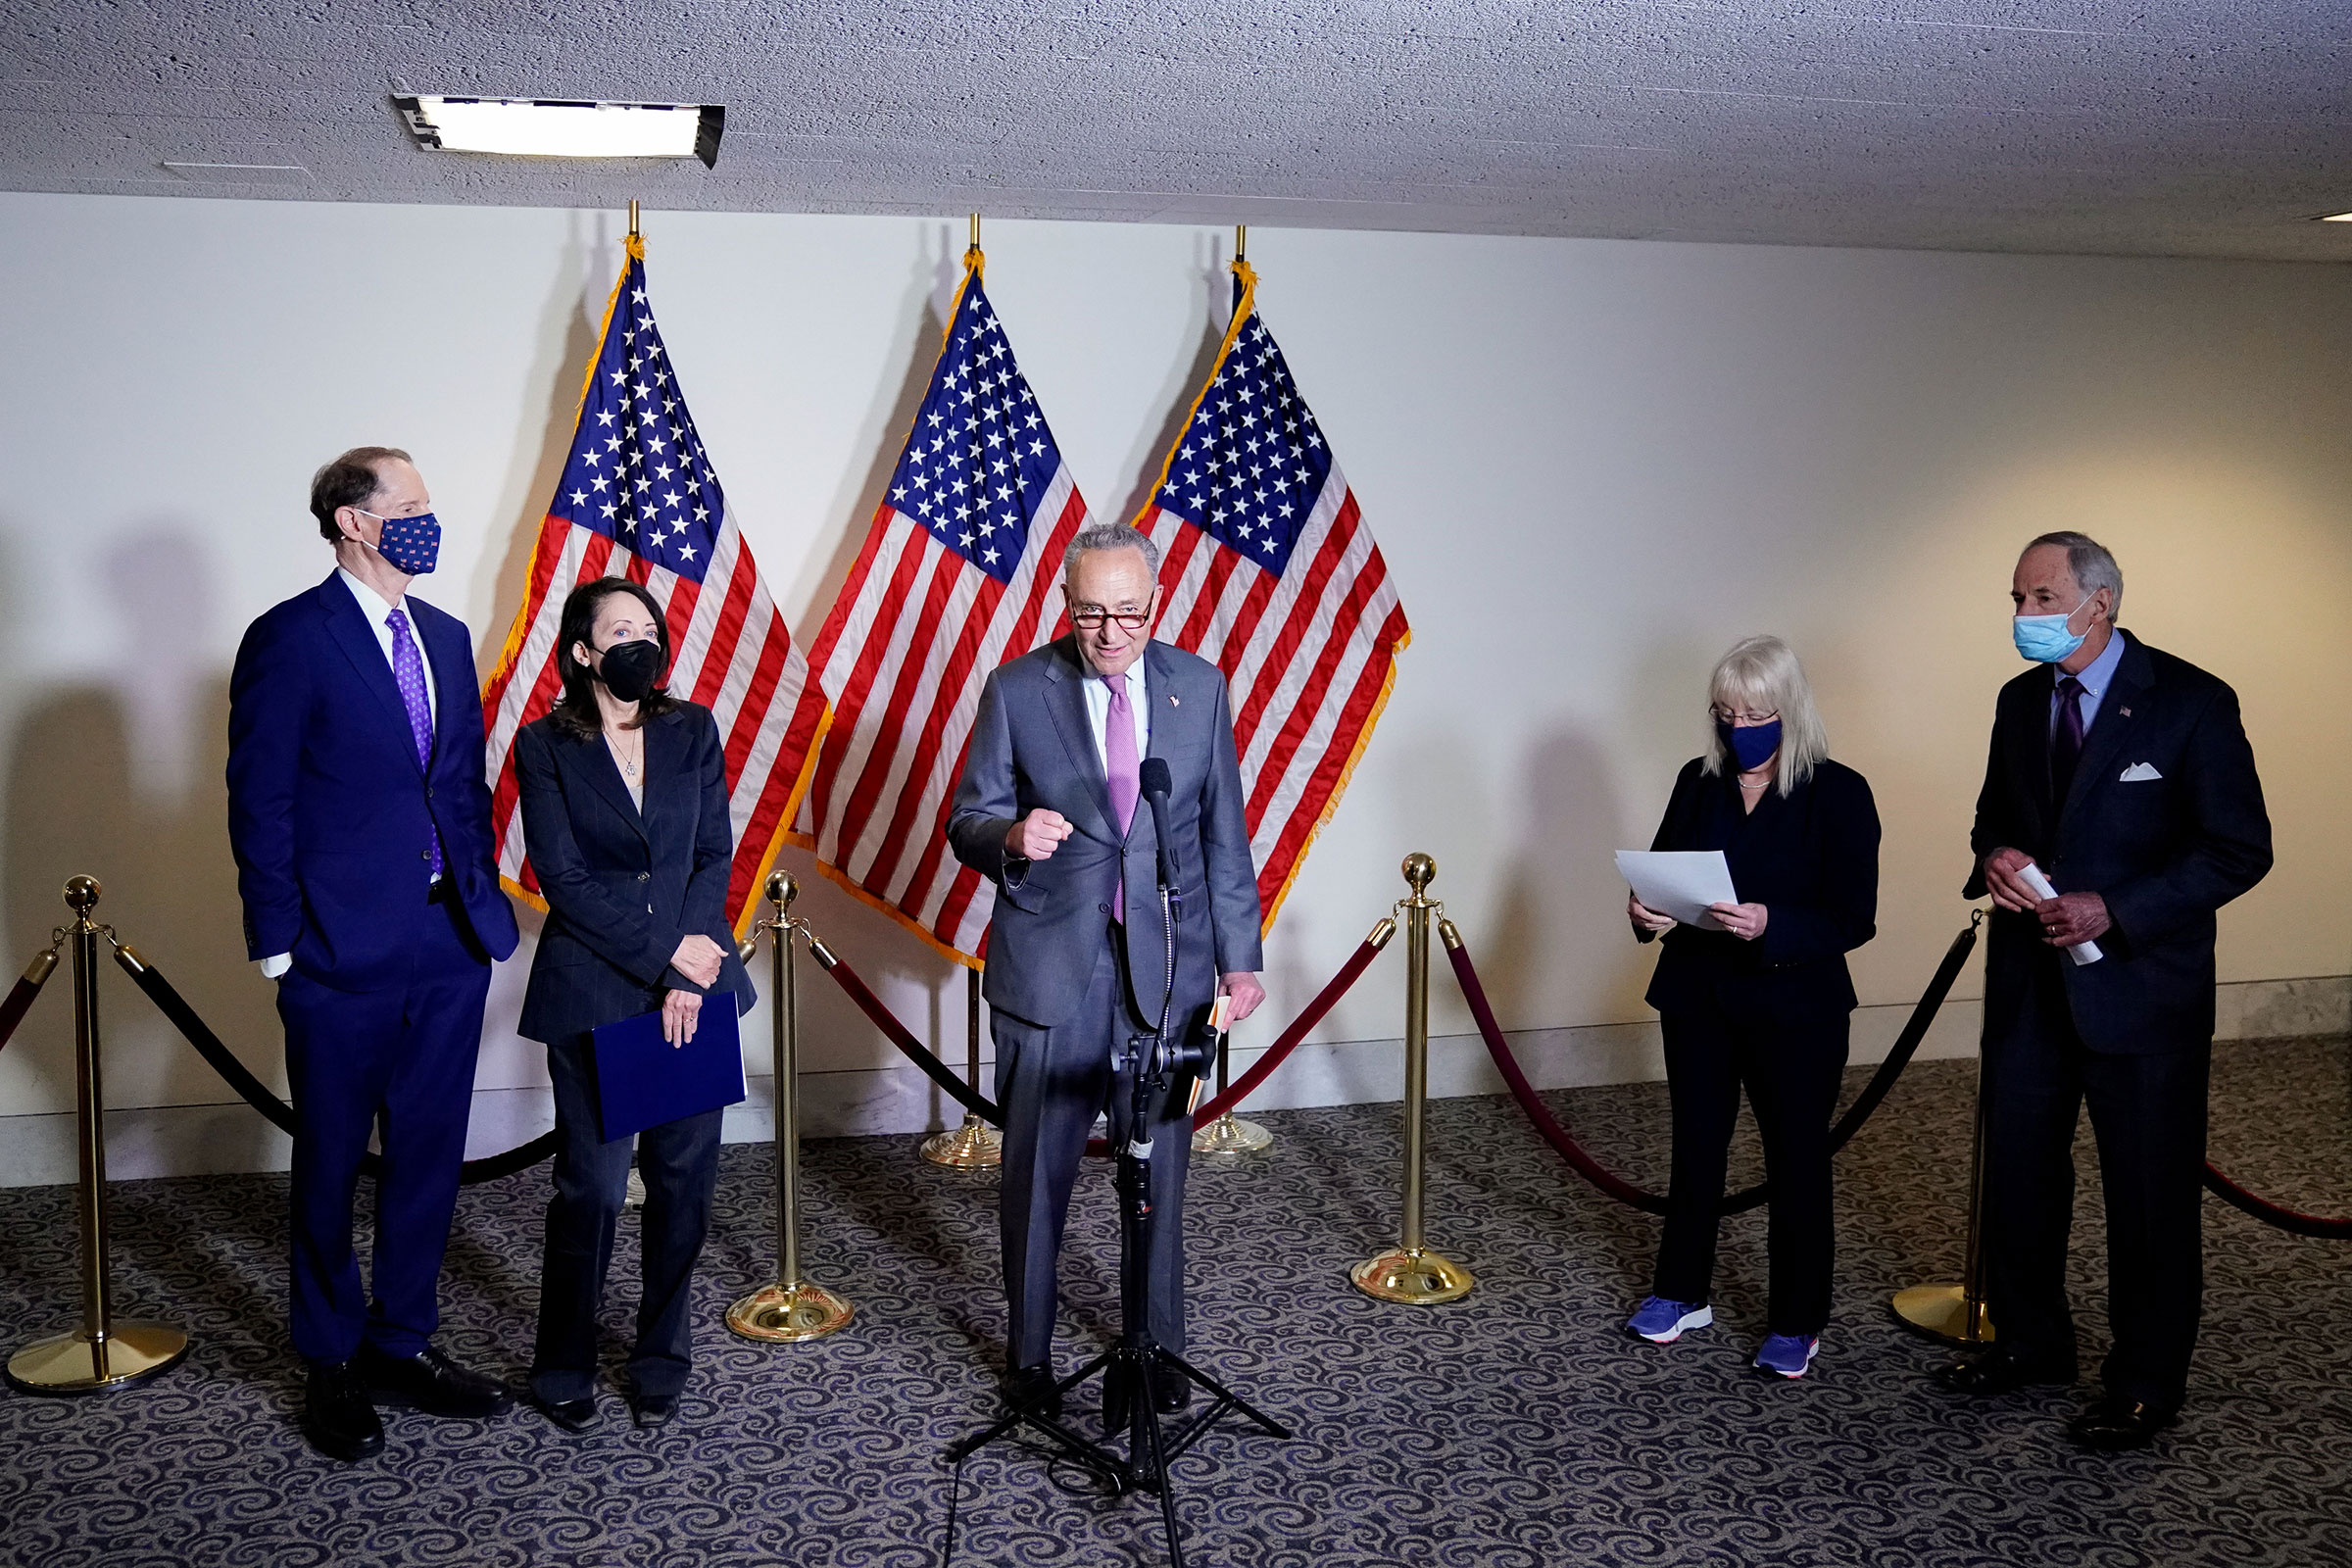 Democratic leadership holds a news conference after the first Democratic luncheon meeting since COVID-19 restrictions went into effect on Capitol Hill in Washington